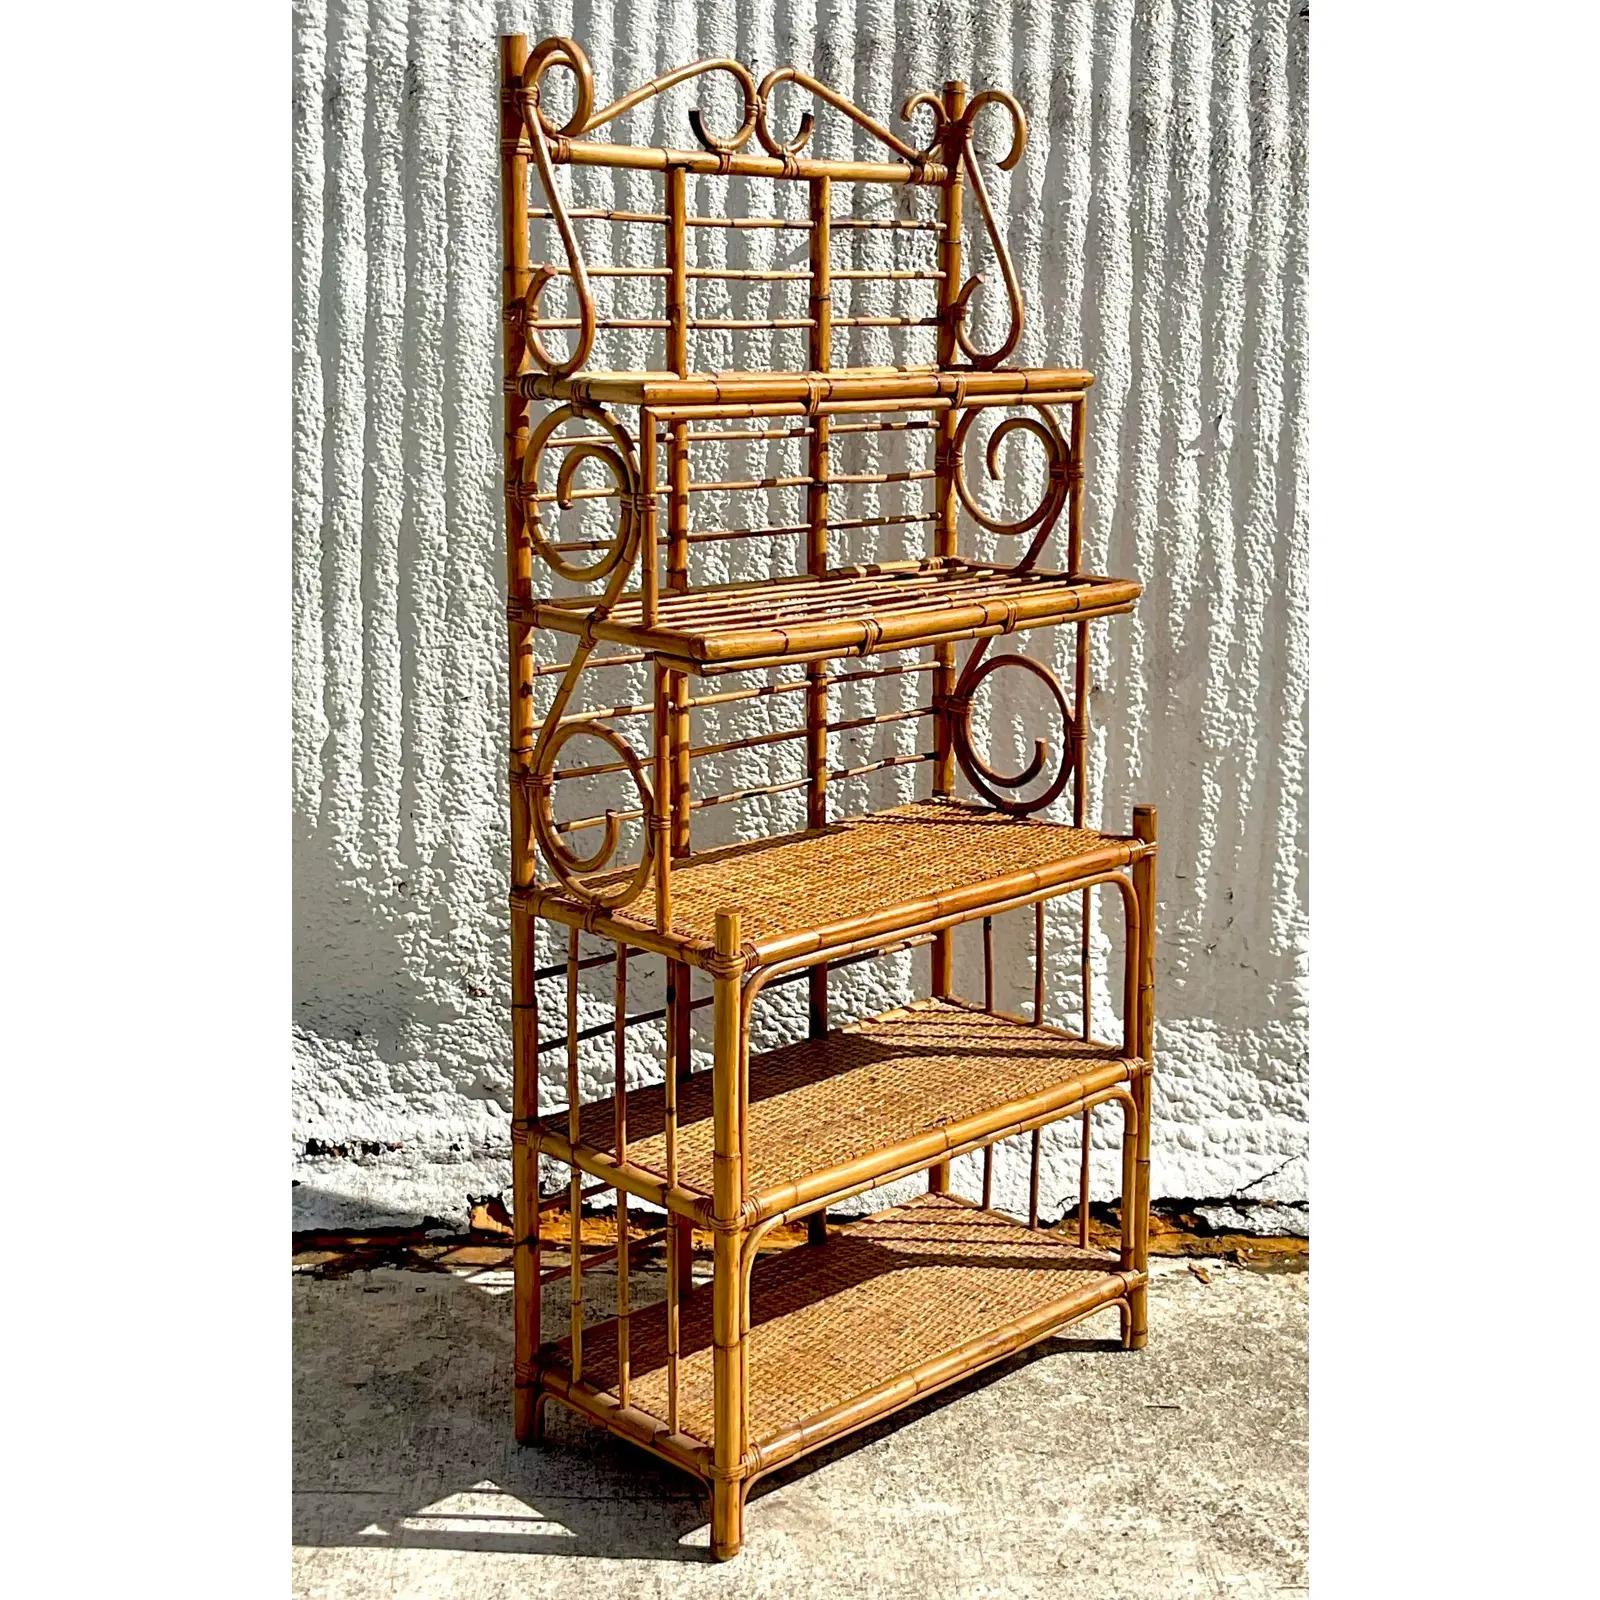 A fabulous vintage Coastal Bakers Rack. Be audio tortoise shell rattan with inset woven rattan shelves. Acquired from a Palm Beach estate.